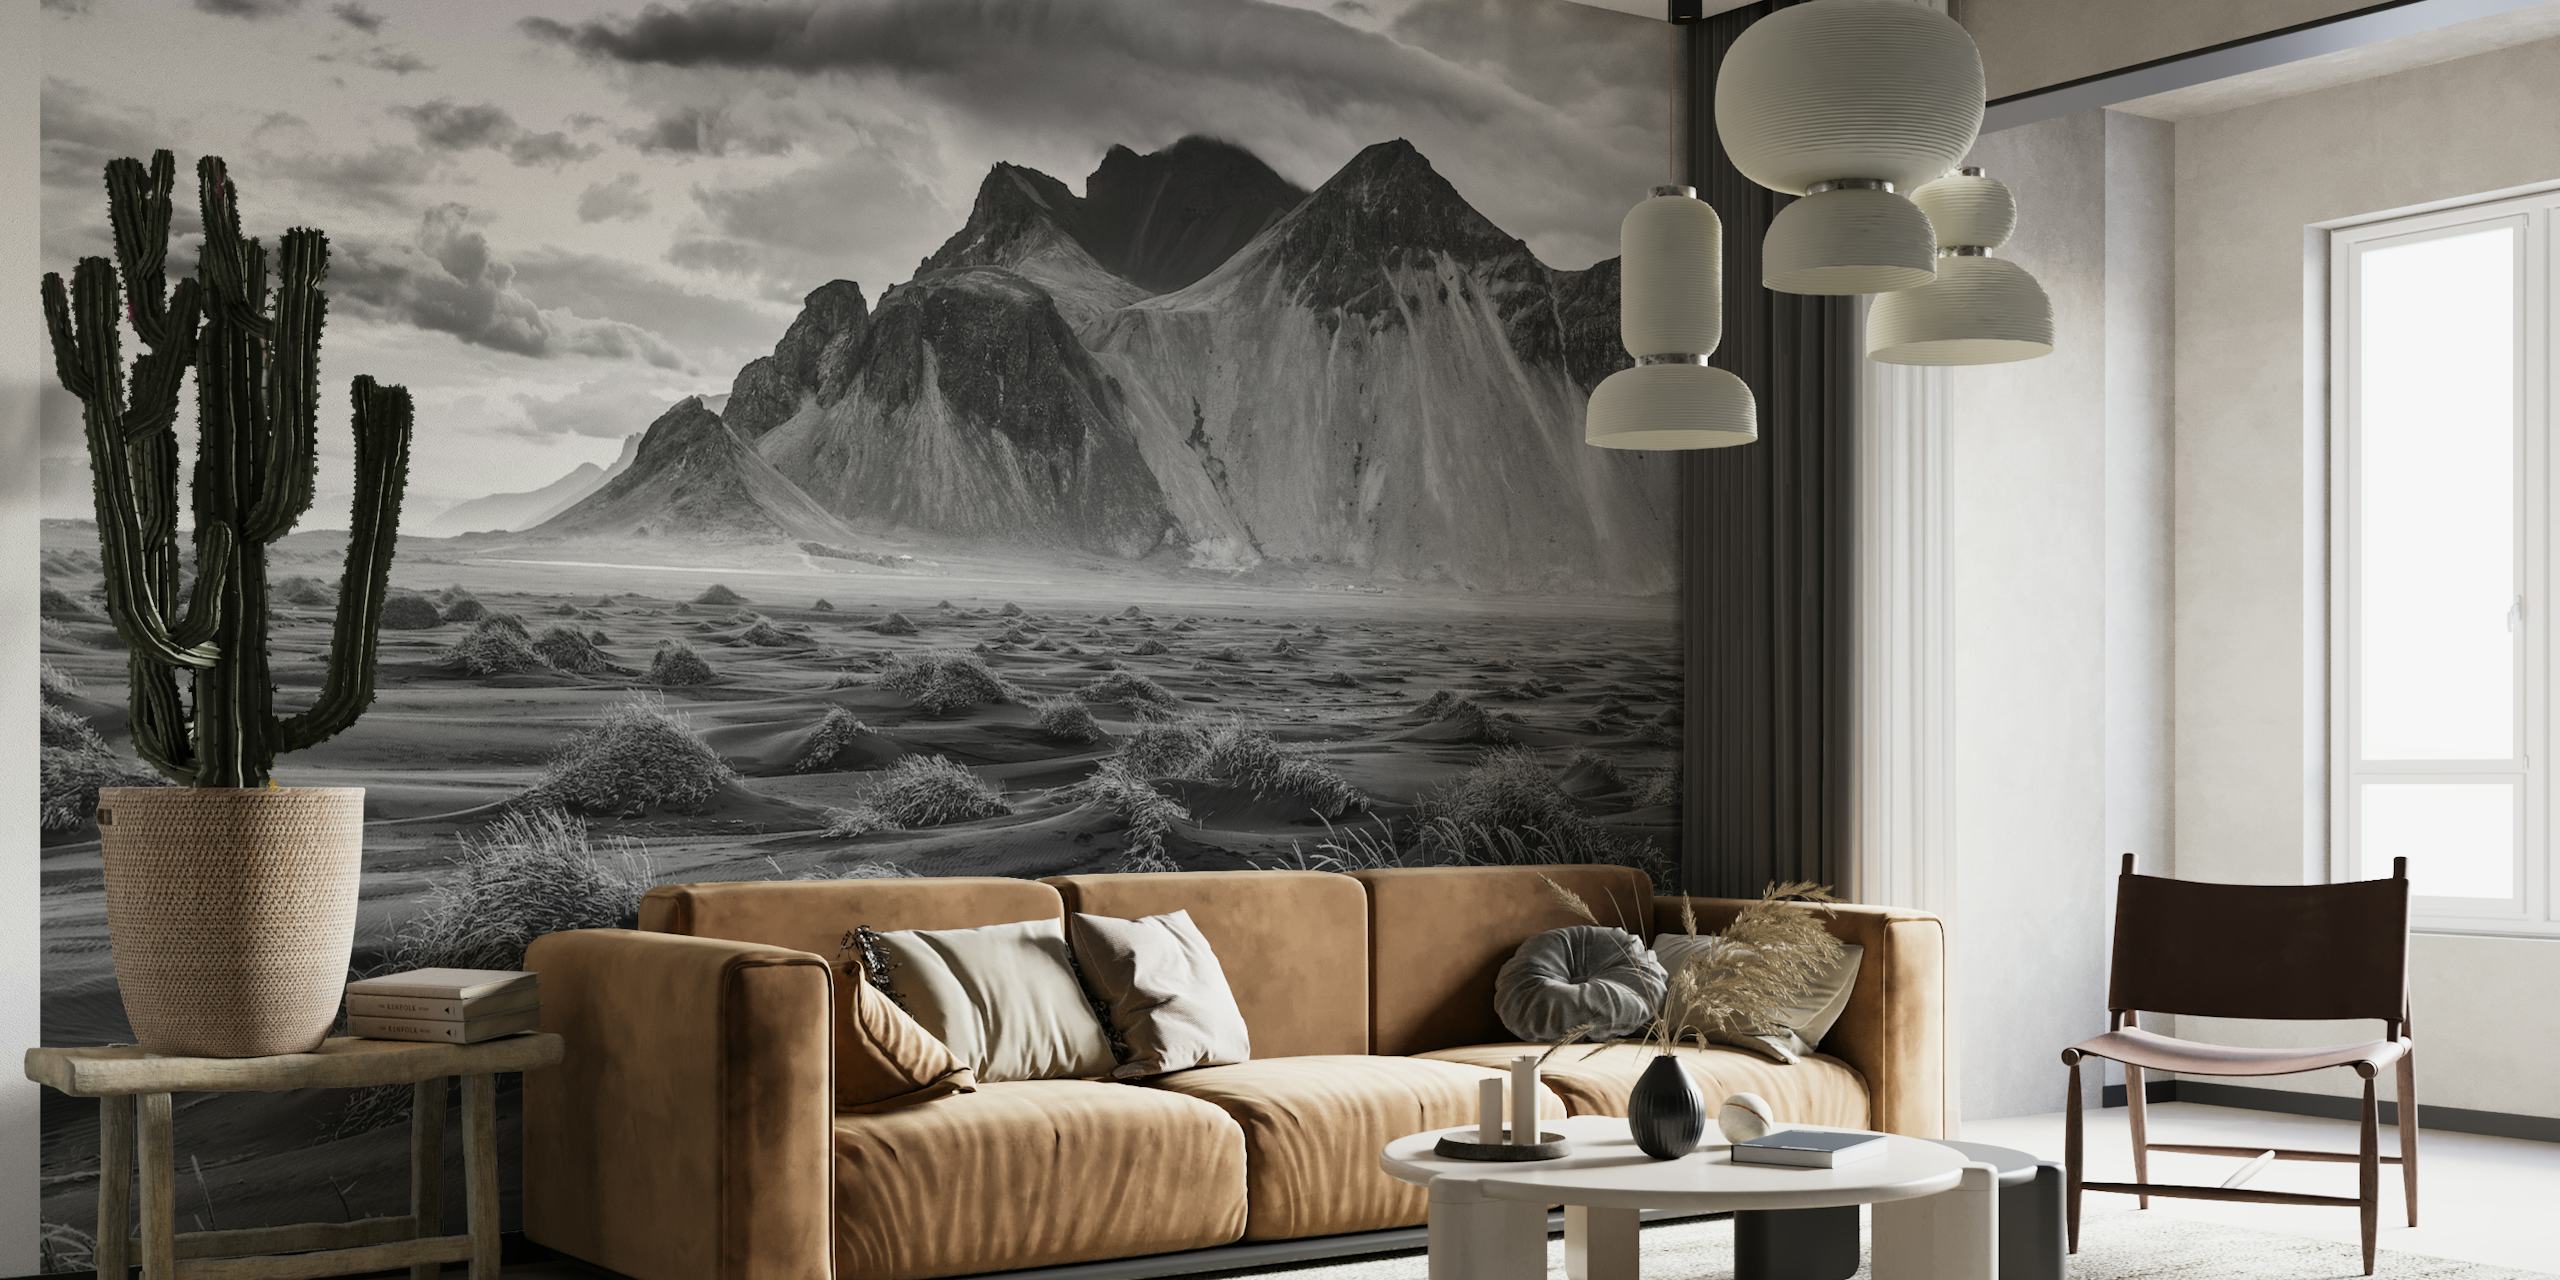 Stokksnes mountain range wall mural with dunes in monochrome